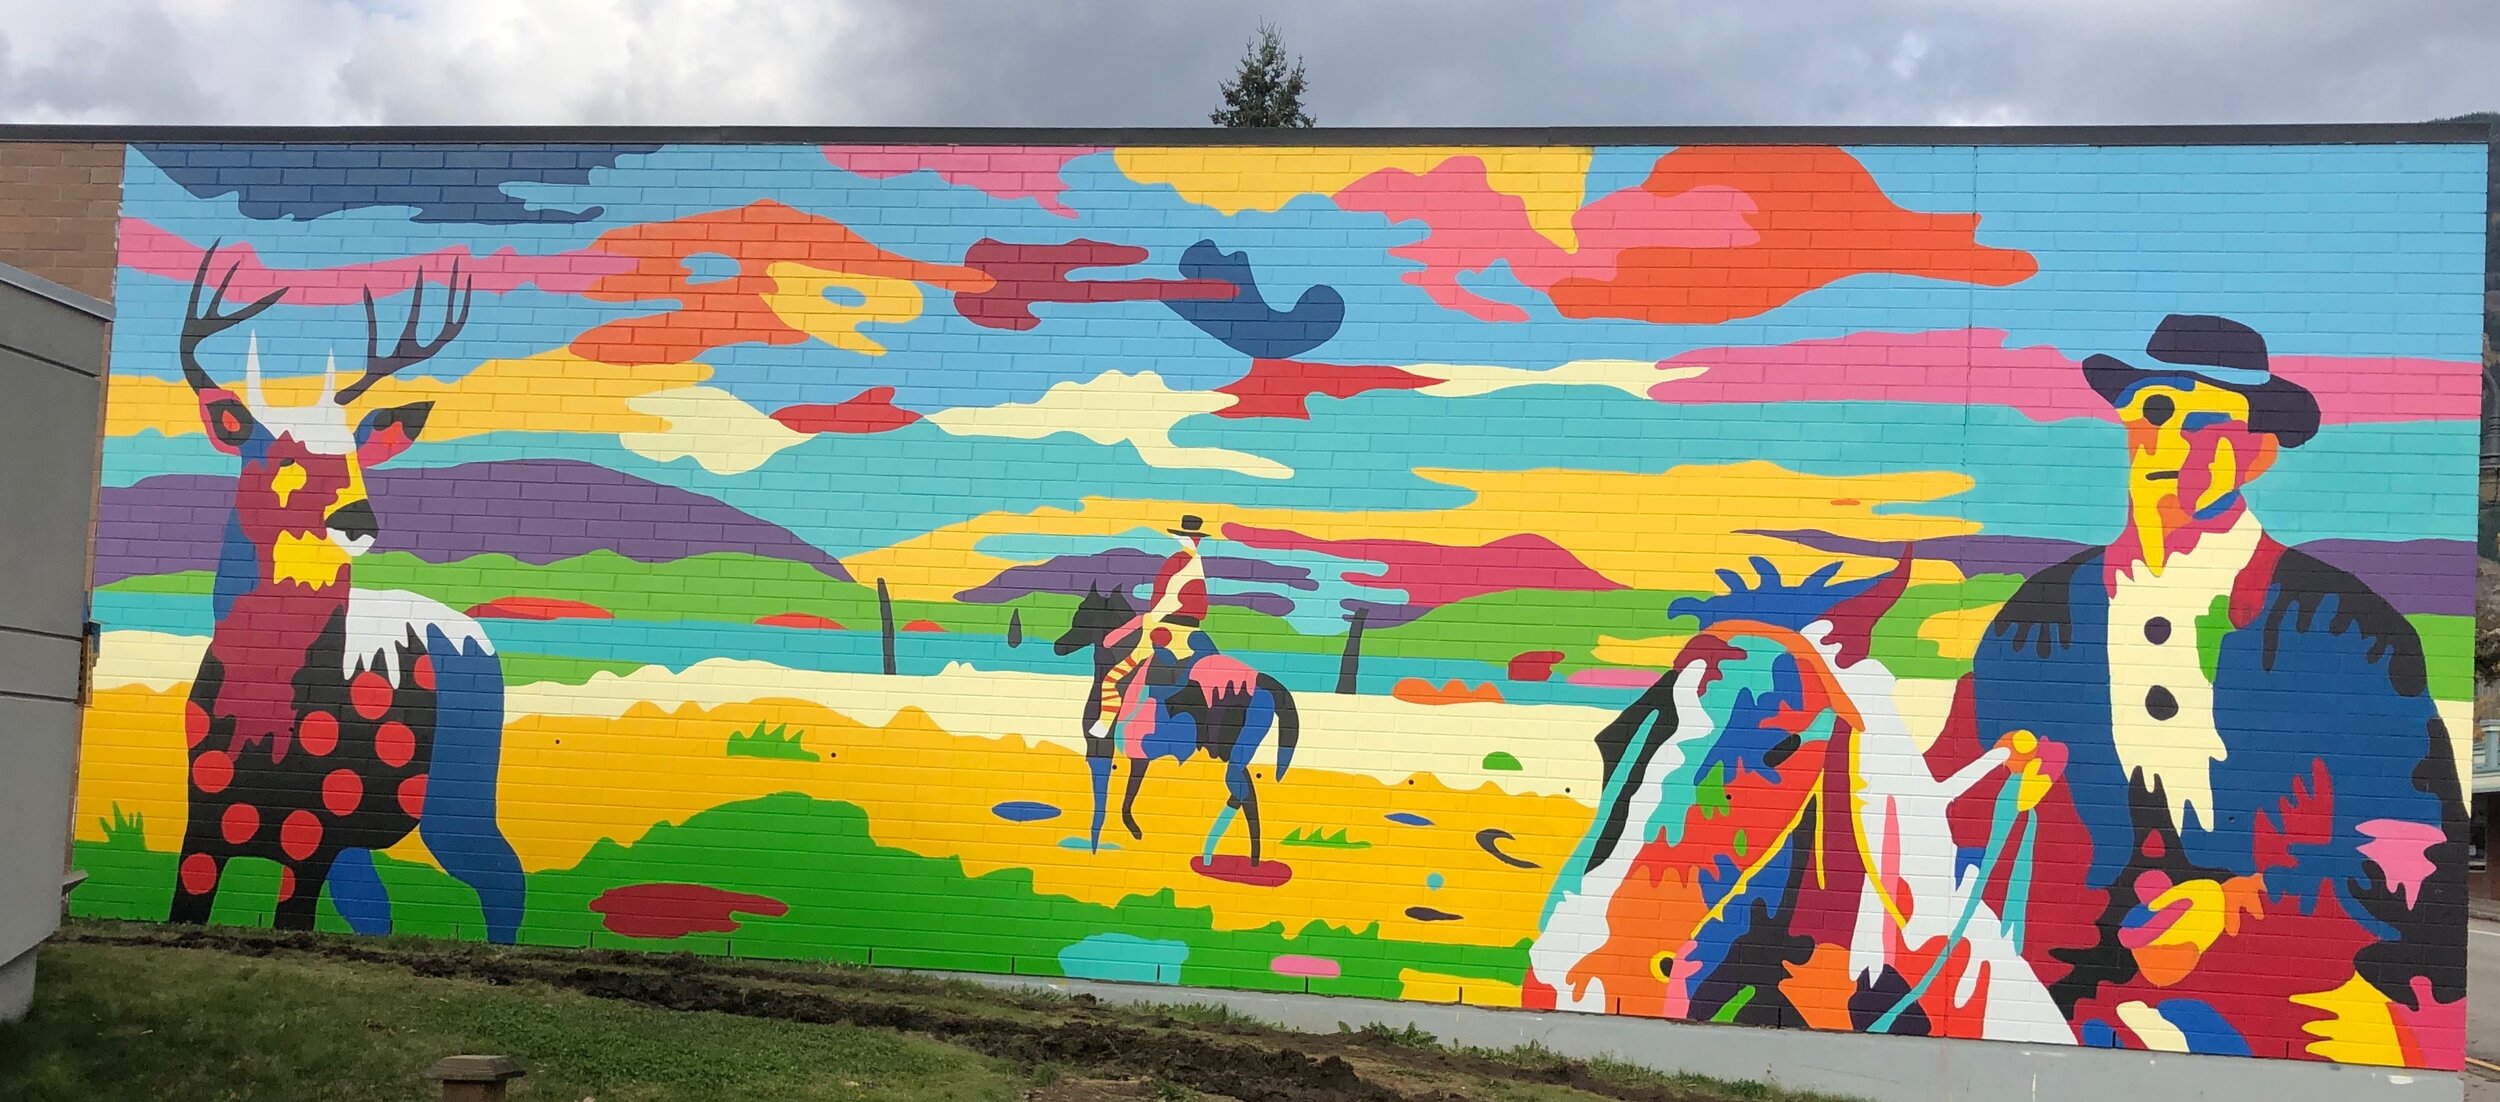   The Gentleman, The Prince and the Clown    20x50 ft. Castlegar BC 